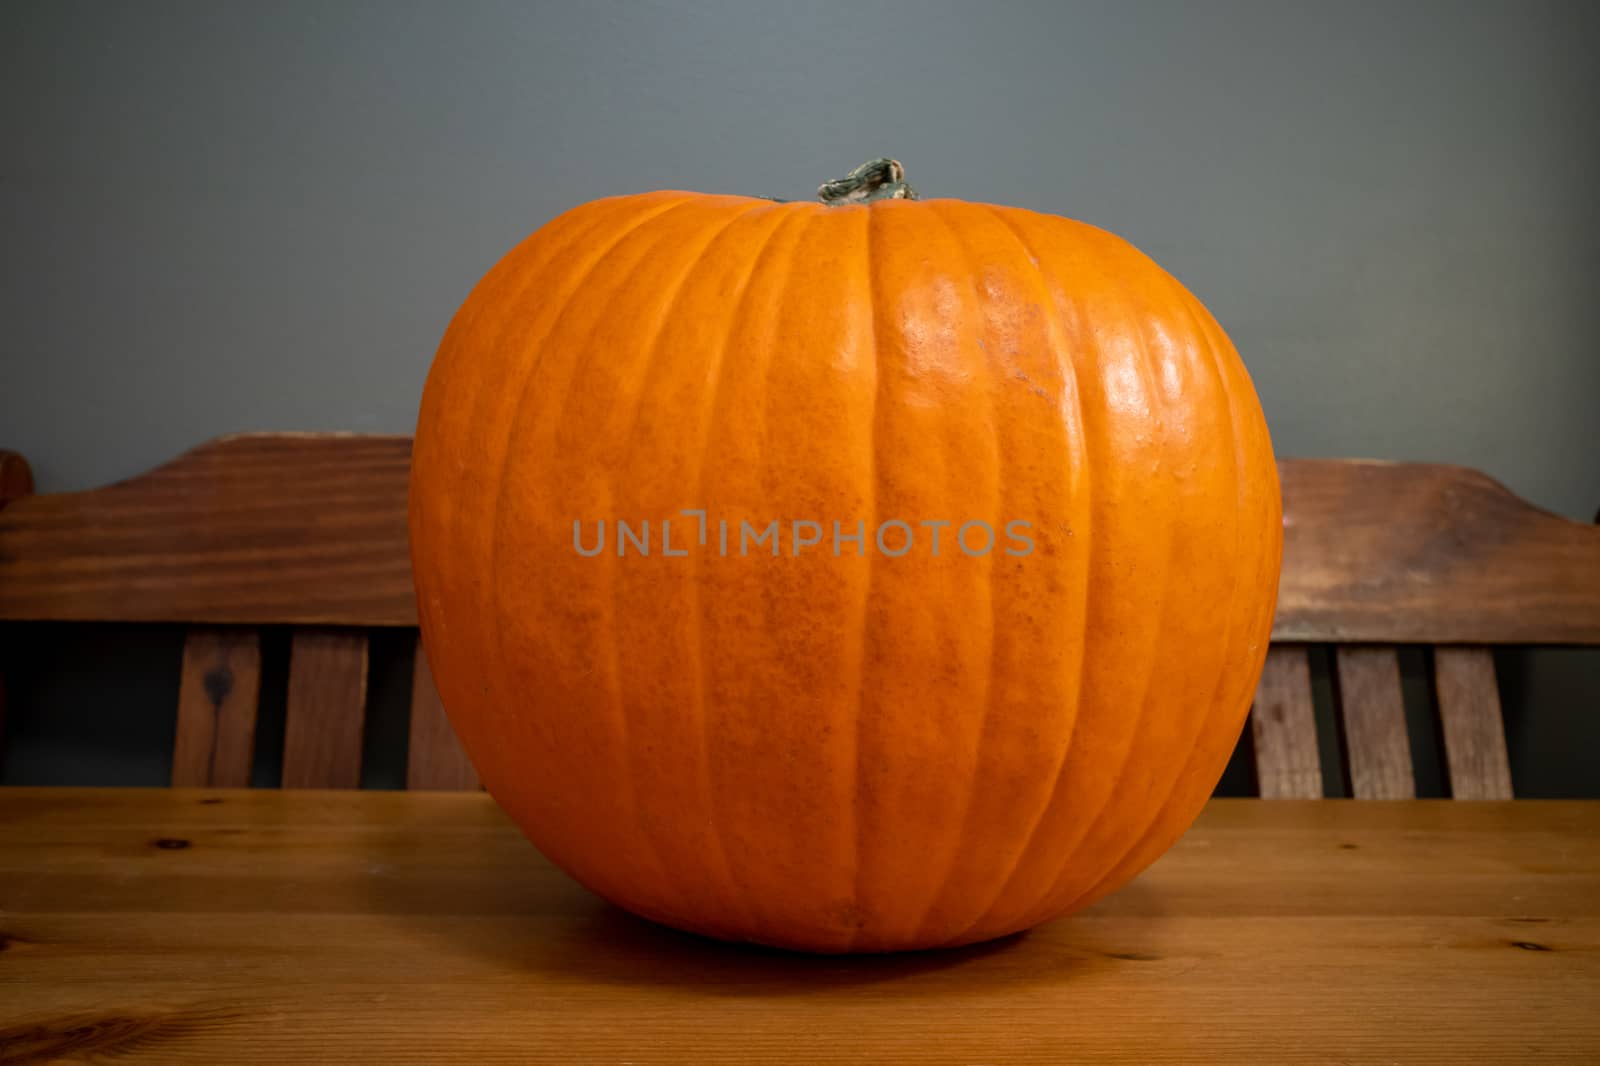 A Pumpkin on a Wooden Table by colintemple